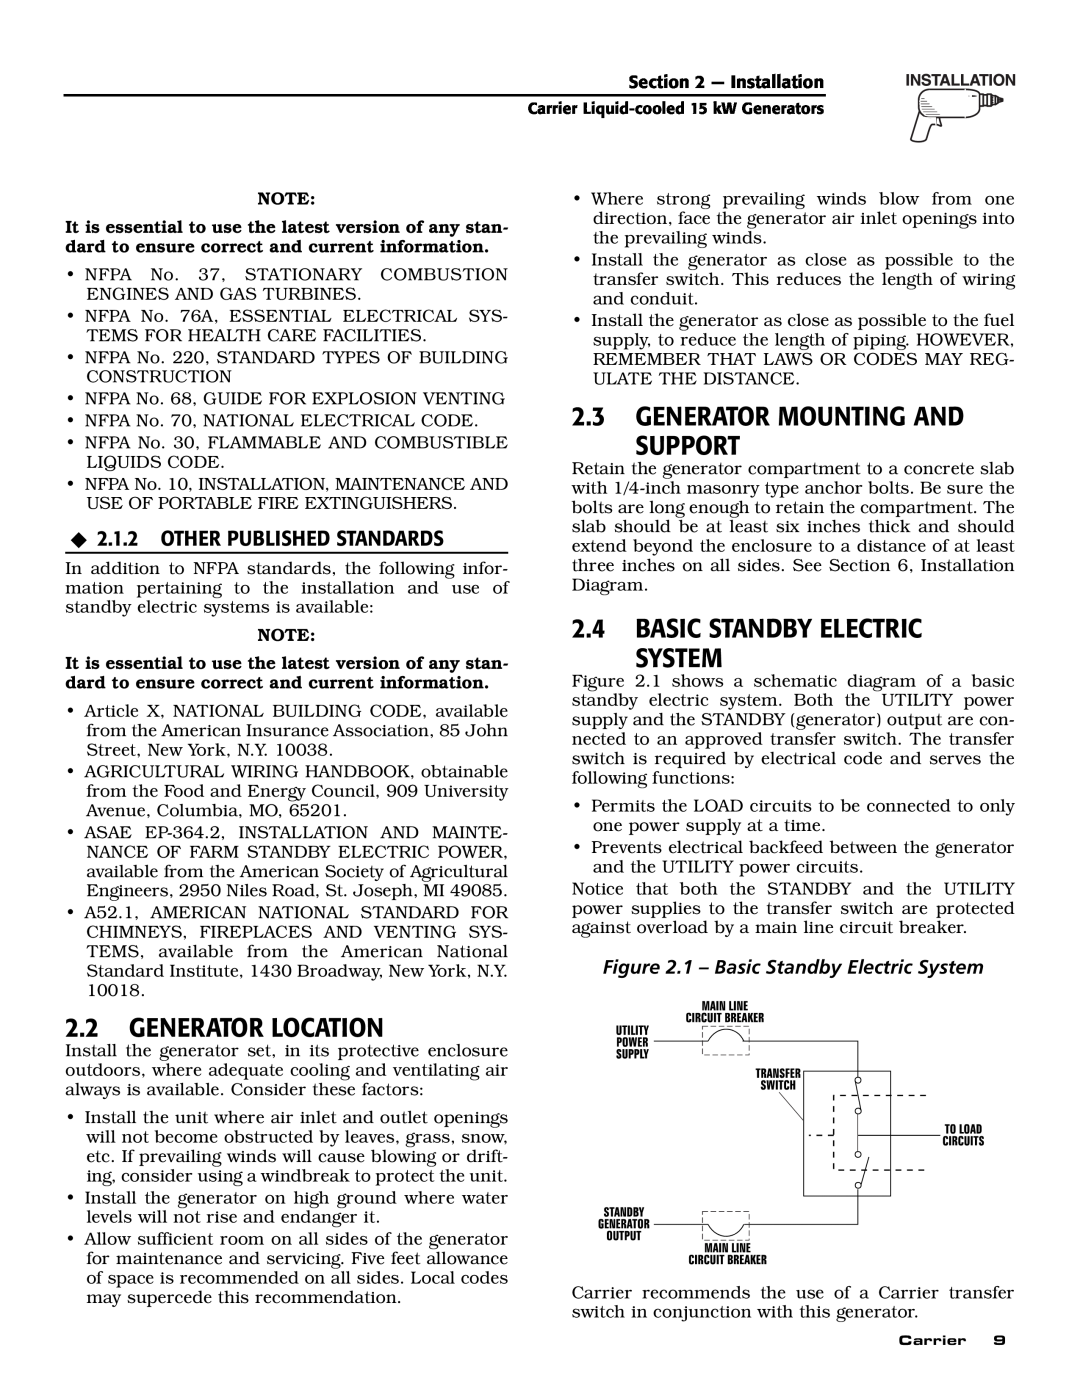 Generac ASPAS1CCL015 owner manual Generator Mounting And Support, Basic Standby Electric System, Generator Location 